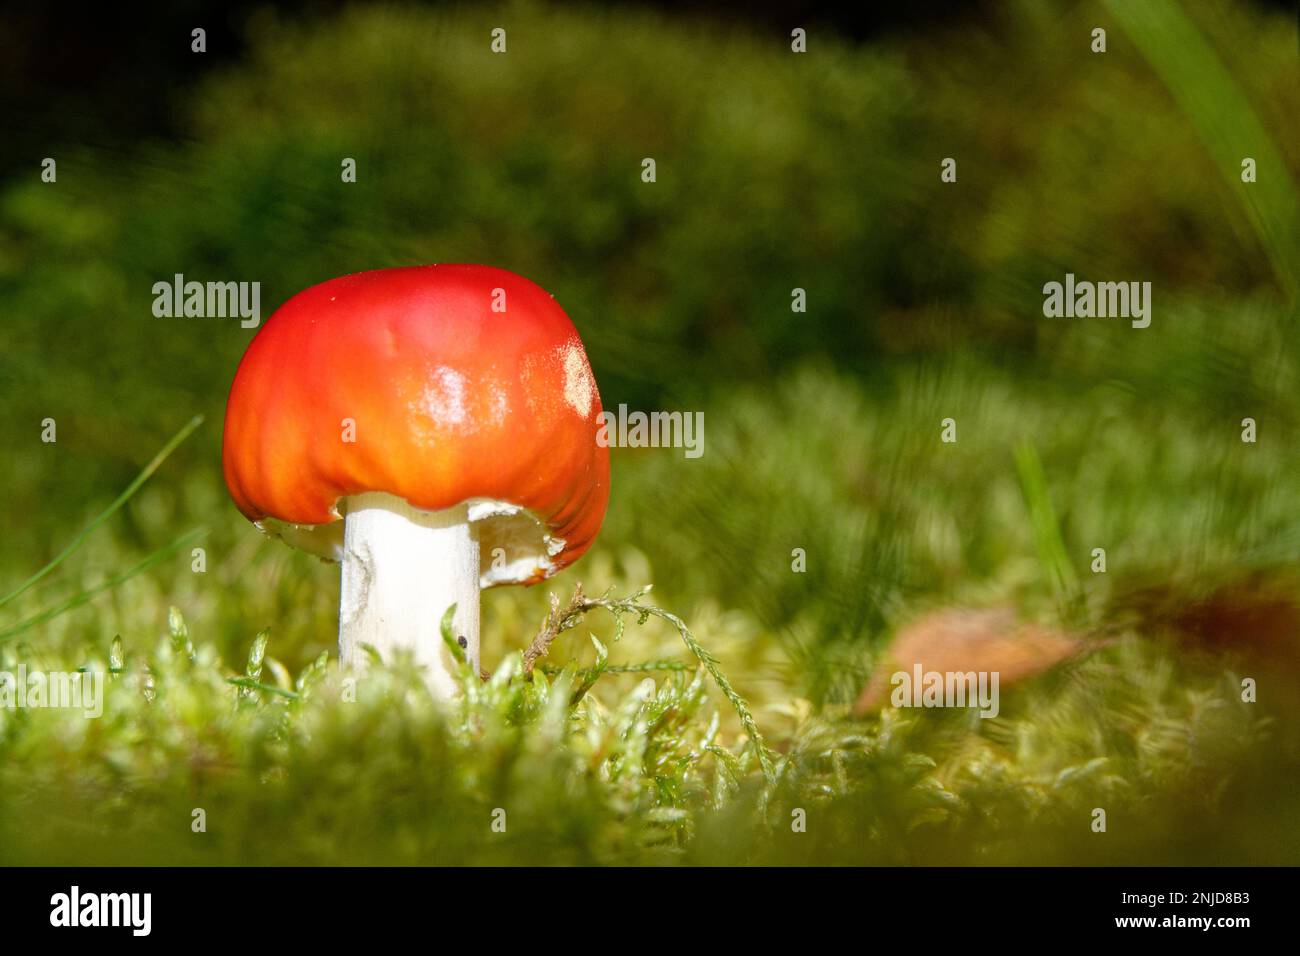 red toadstool mushroom sourrounded by green moss Stock Photo